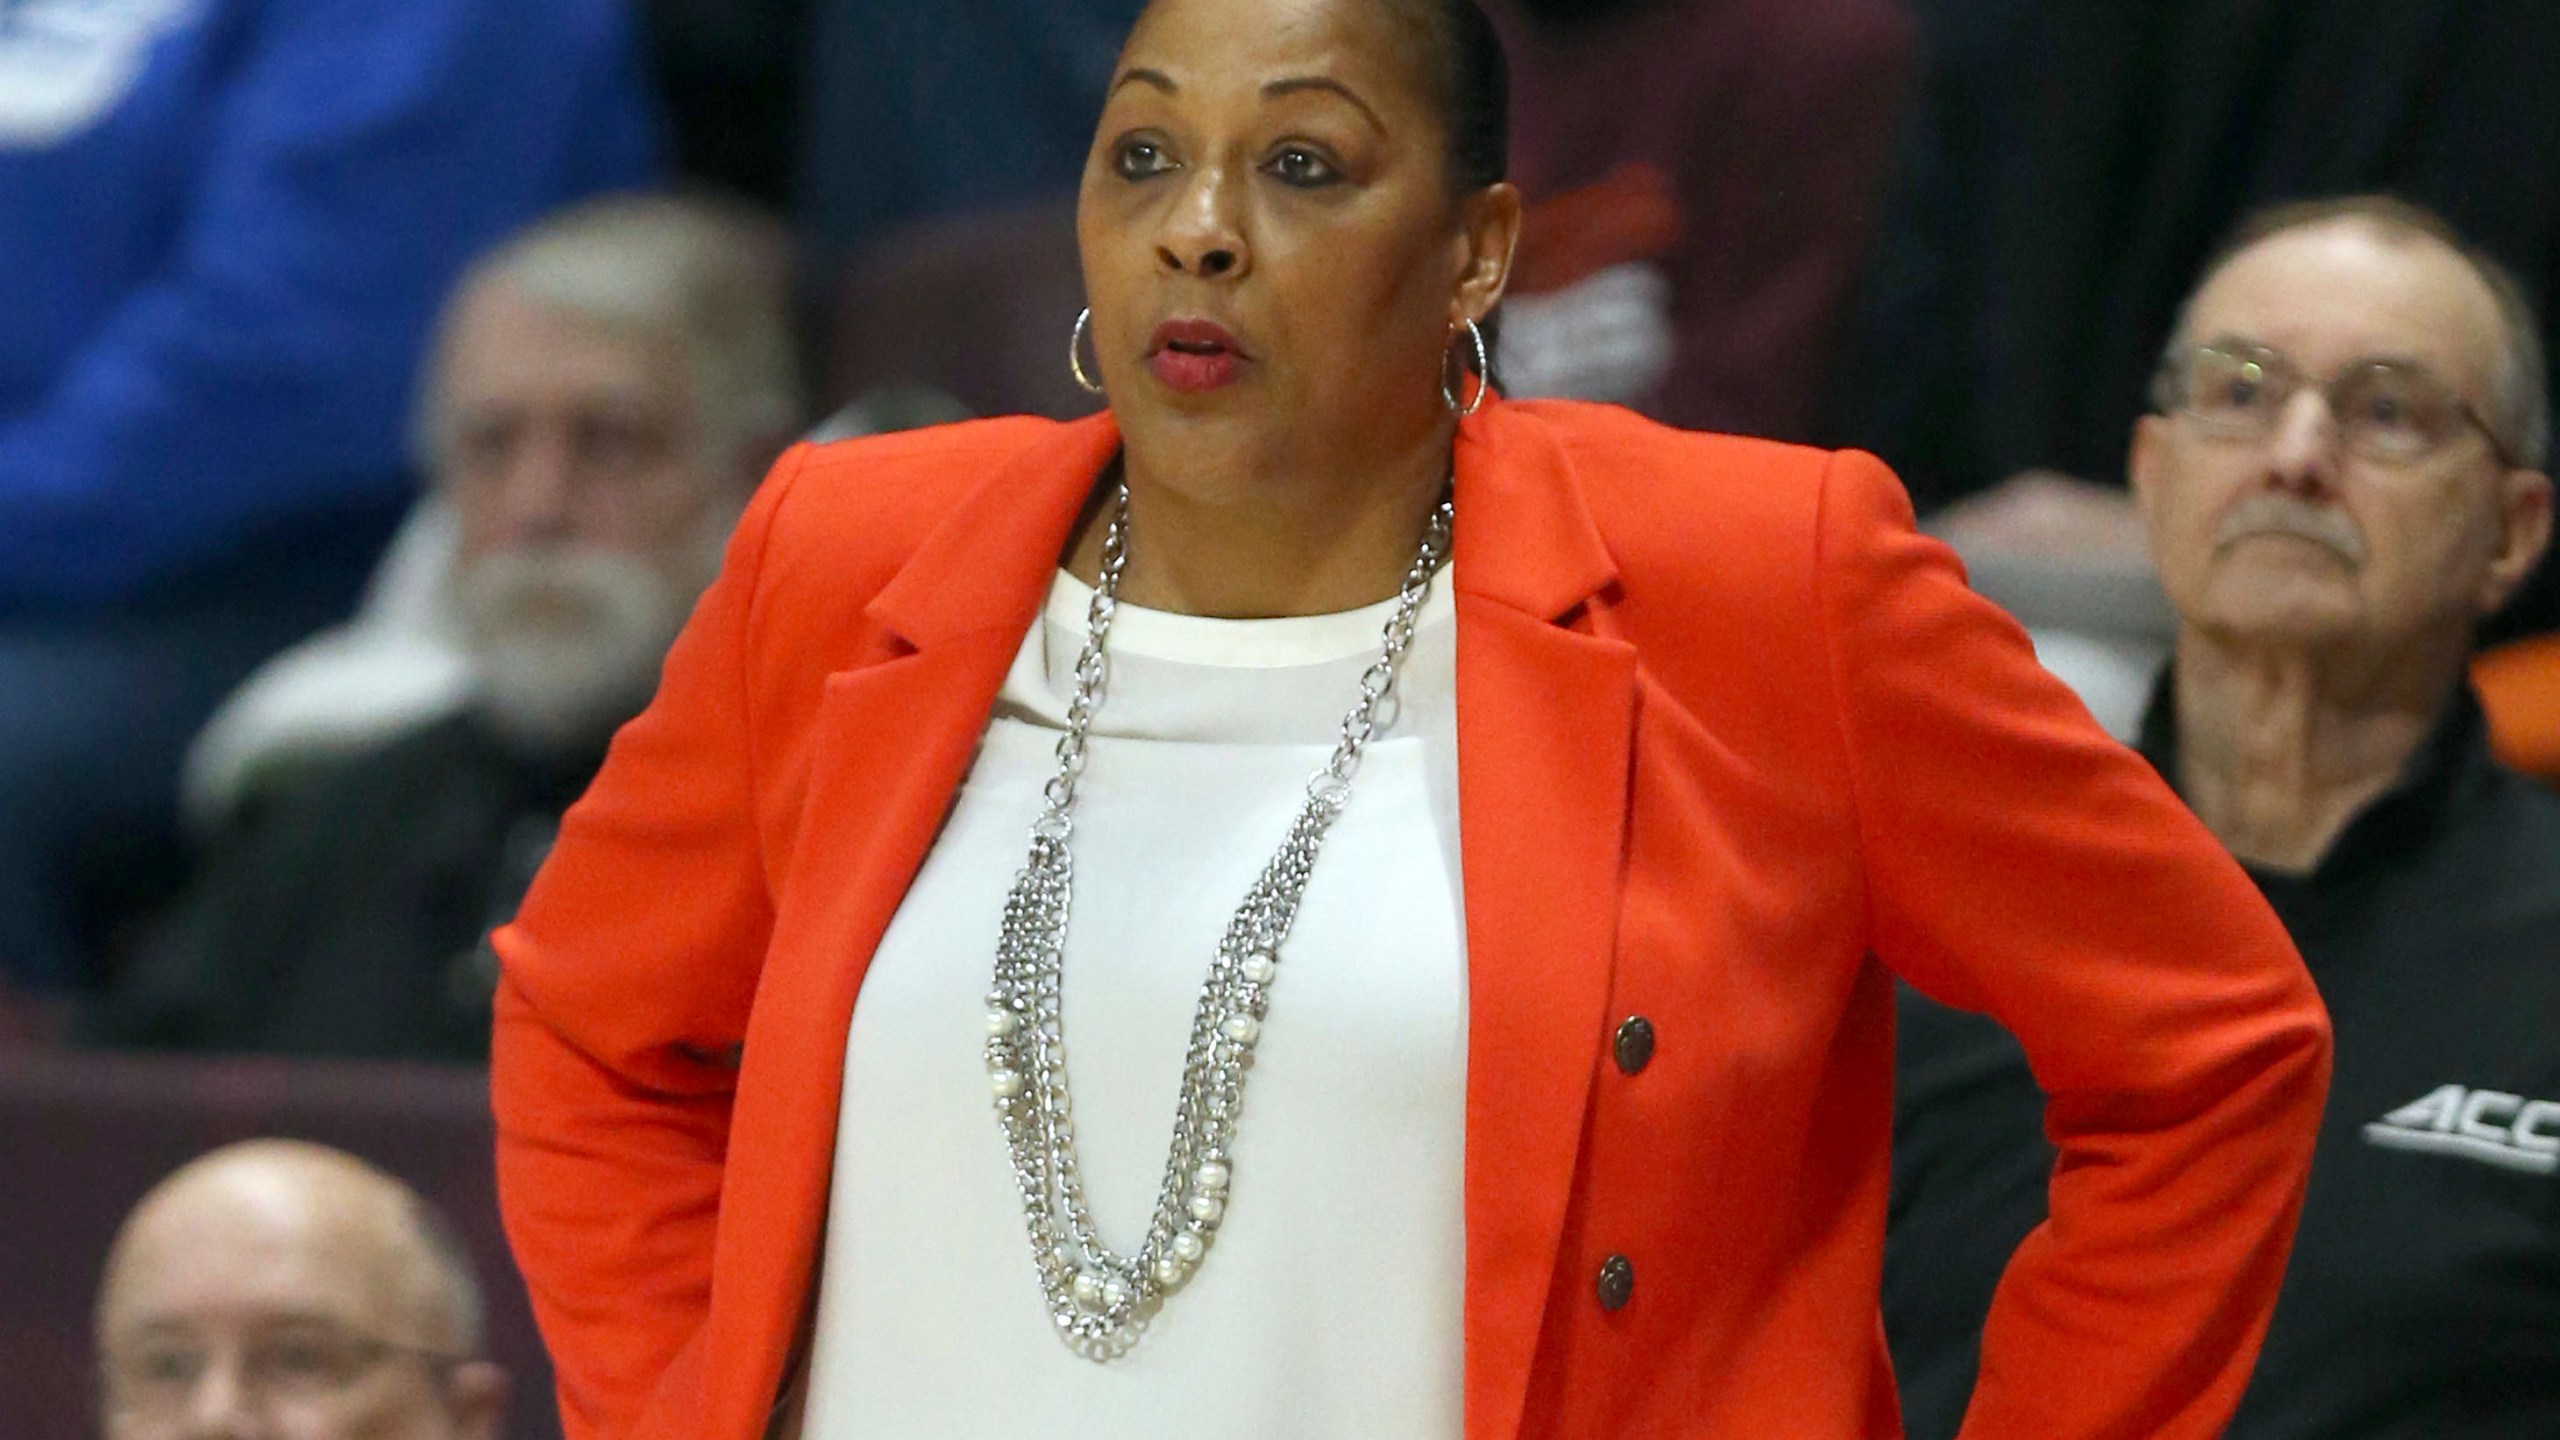 FILE - Syracuse head coach Felisha Legette-Jack reacts during the first half of an NCAA college basketball game against Virginia Tech in Blacksburg, Va., Thursday, Feb. 2, 2023. Legette-Jack is one of a handful of coaches in women's NCAA Tournament leading their alma maters. (Matt Gentry/The Roanoke Times via AP, File)